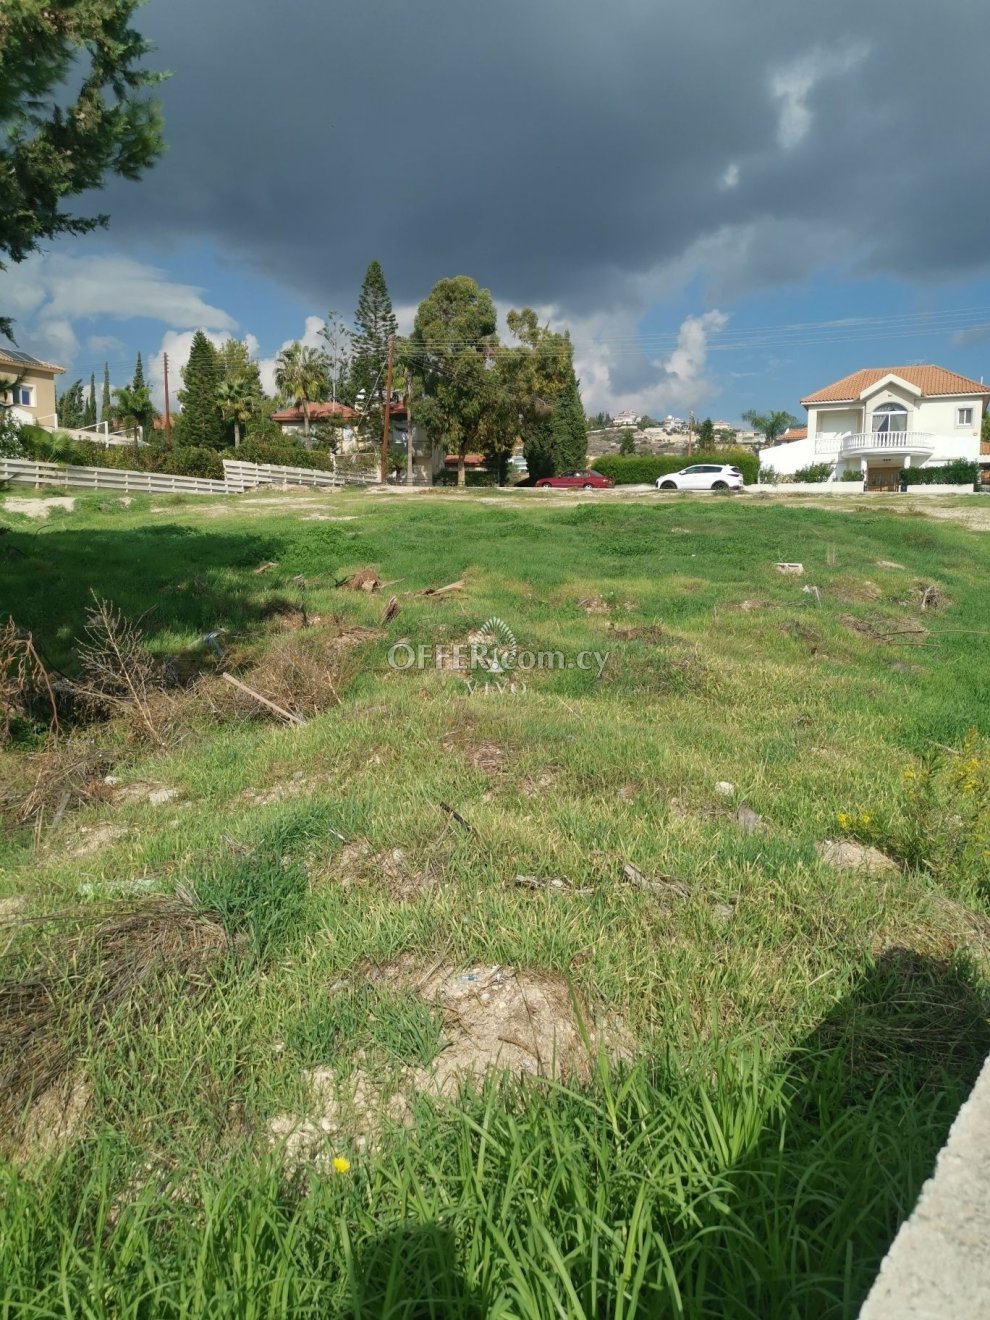 RESIDENTIAL PLOT OF 1501 M2 IN AYIOS TYCHONAS - 3